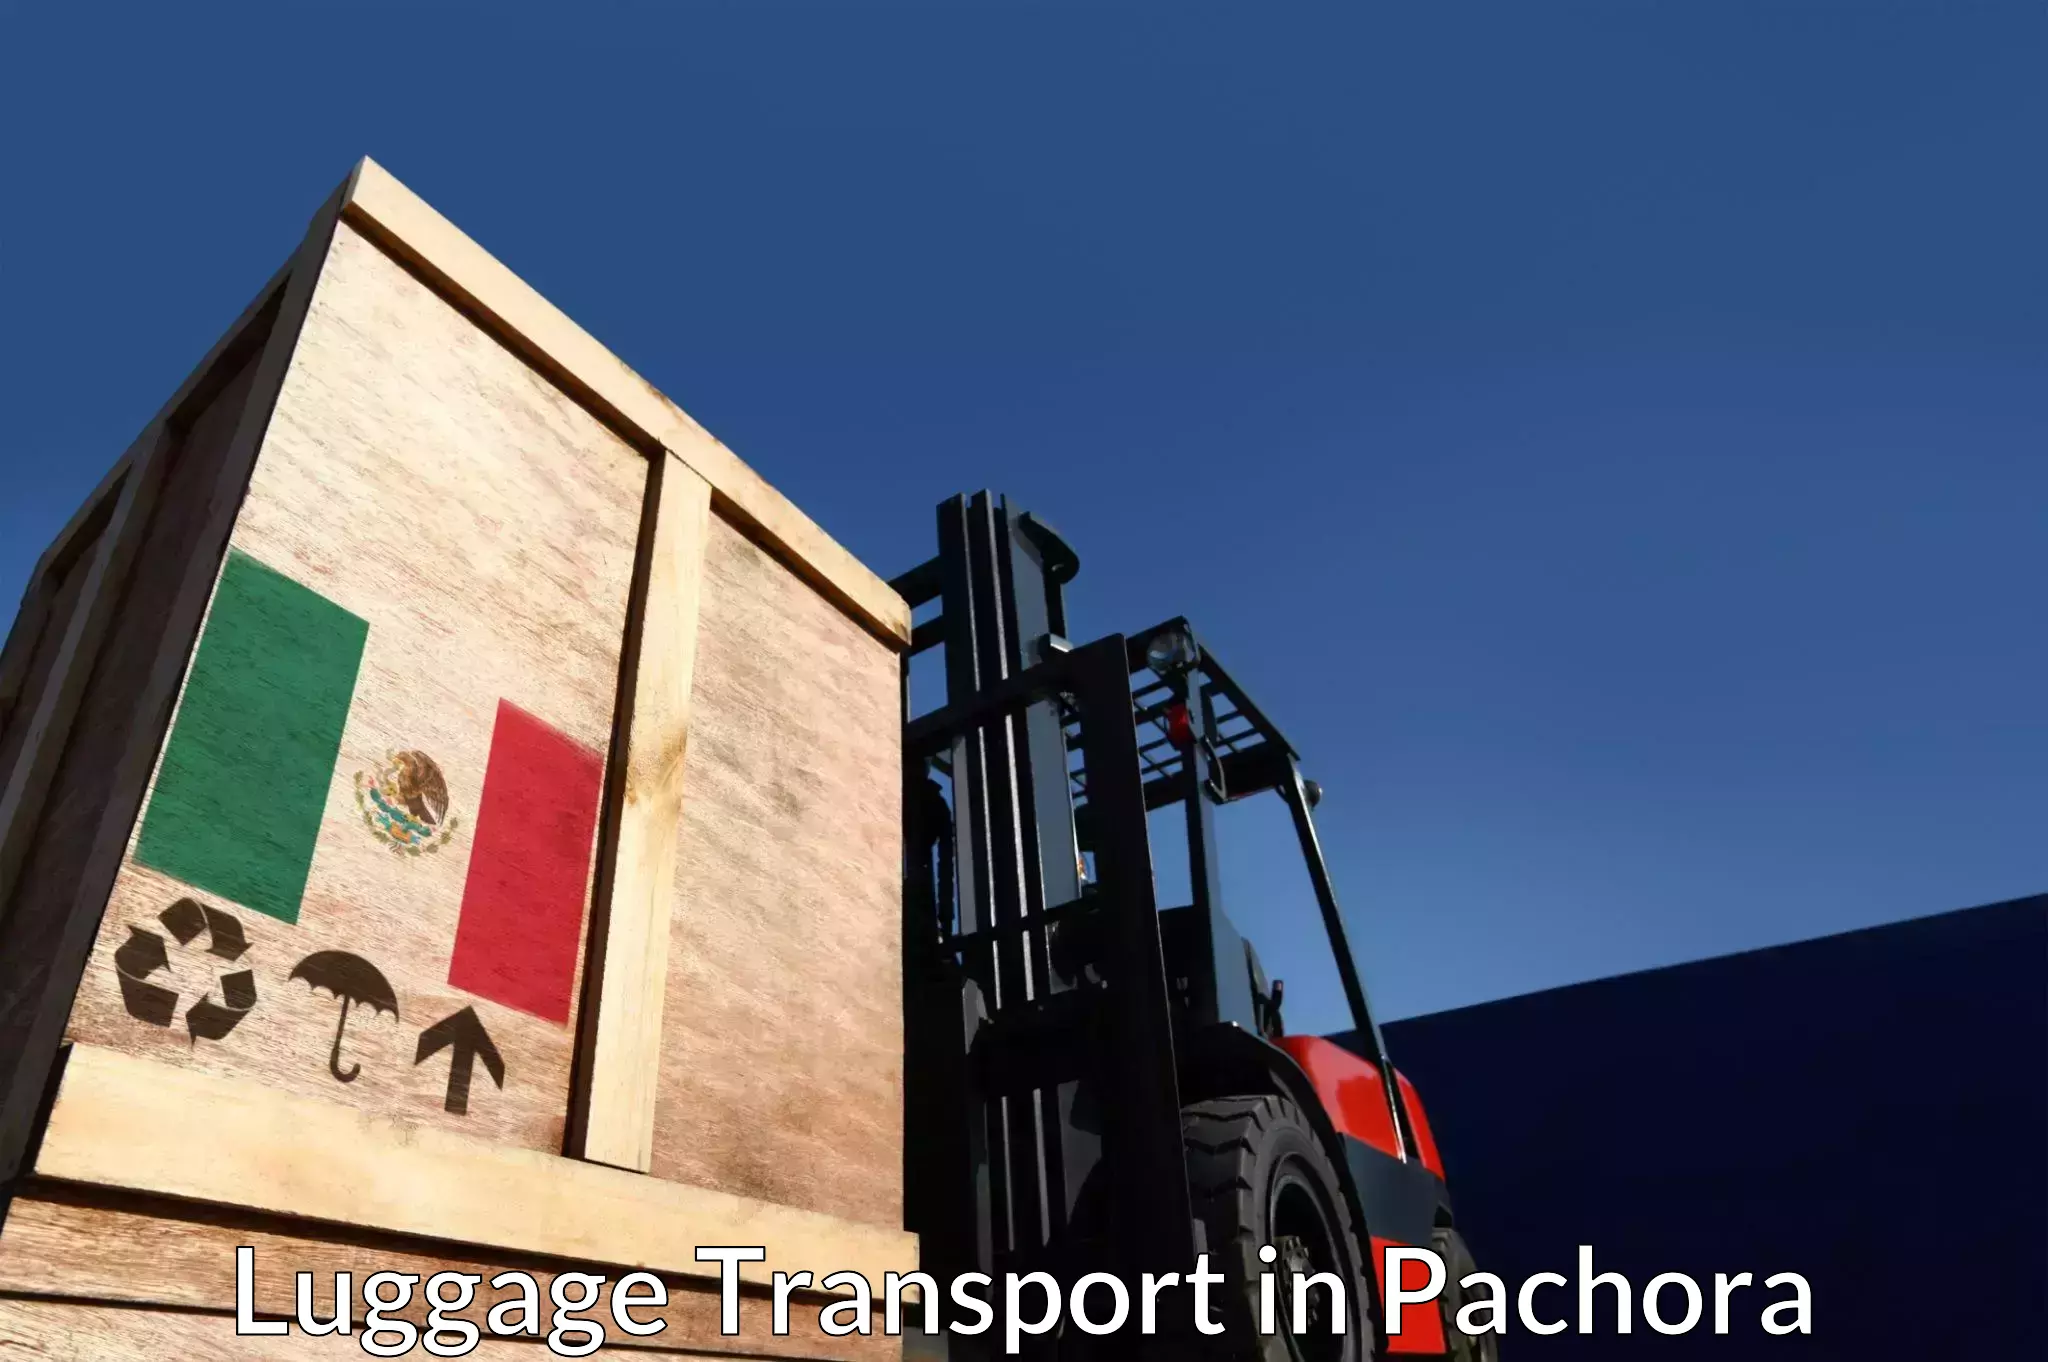 Baggage relocation service in Pachora